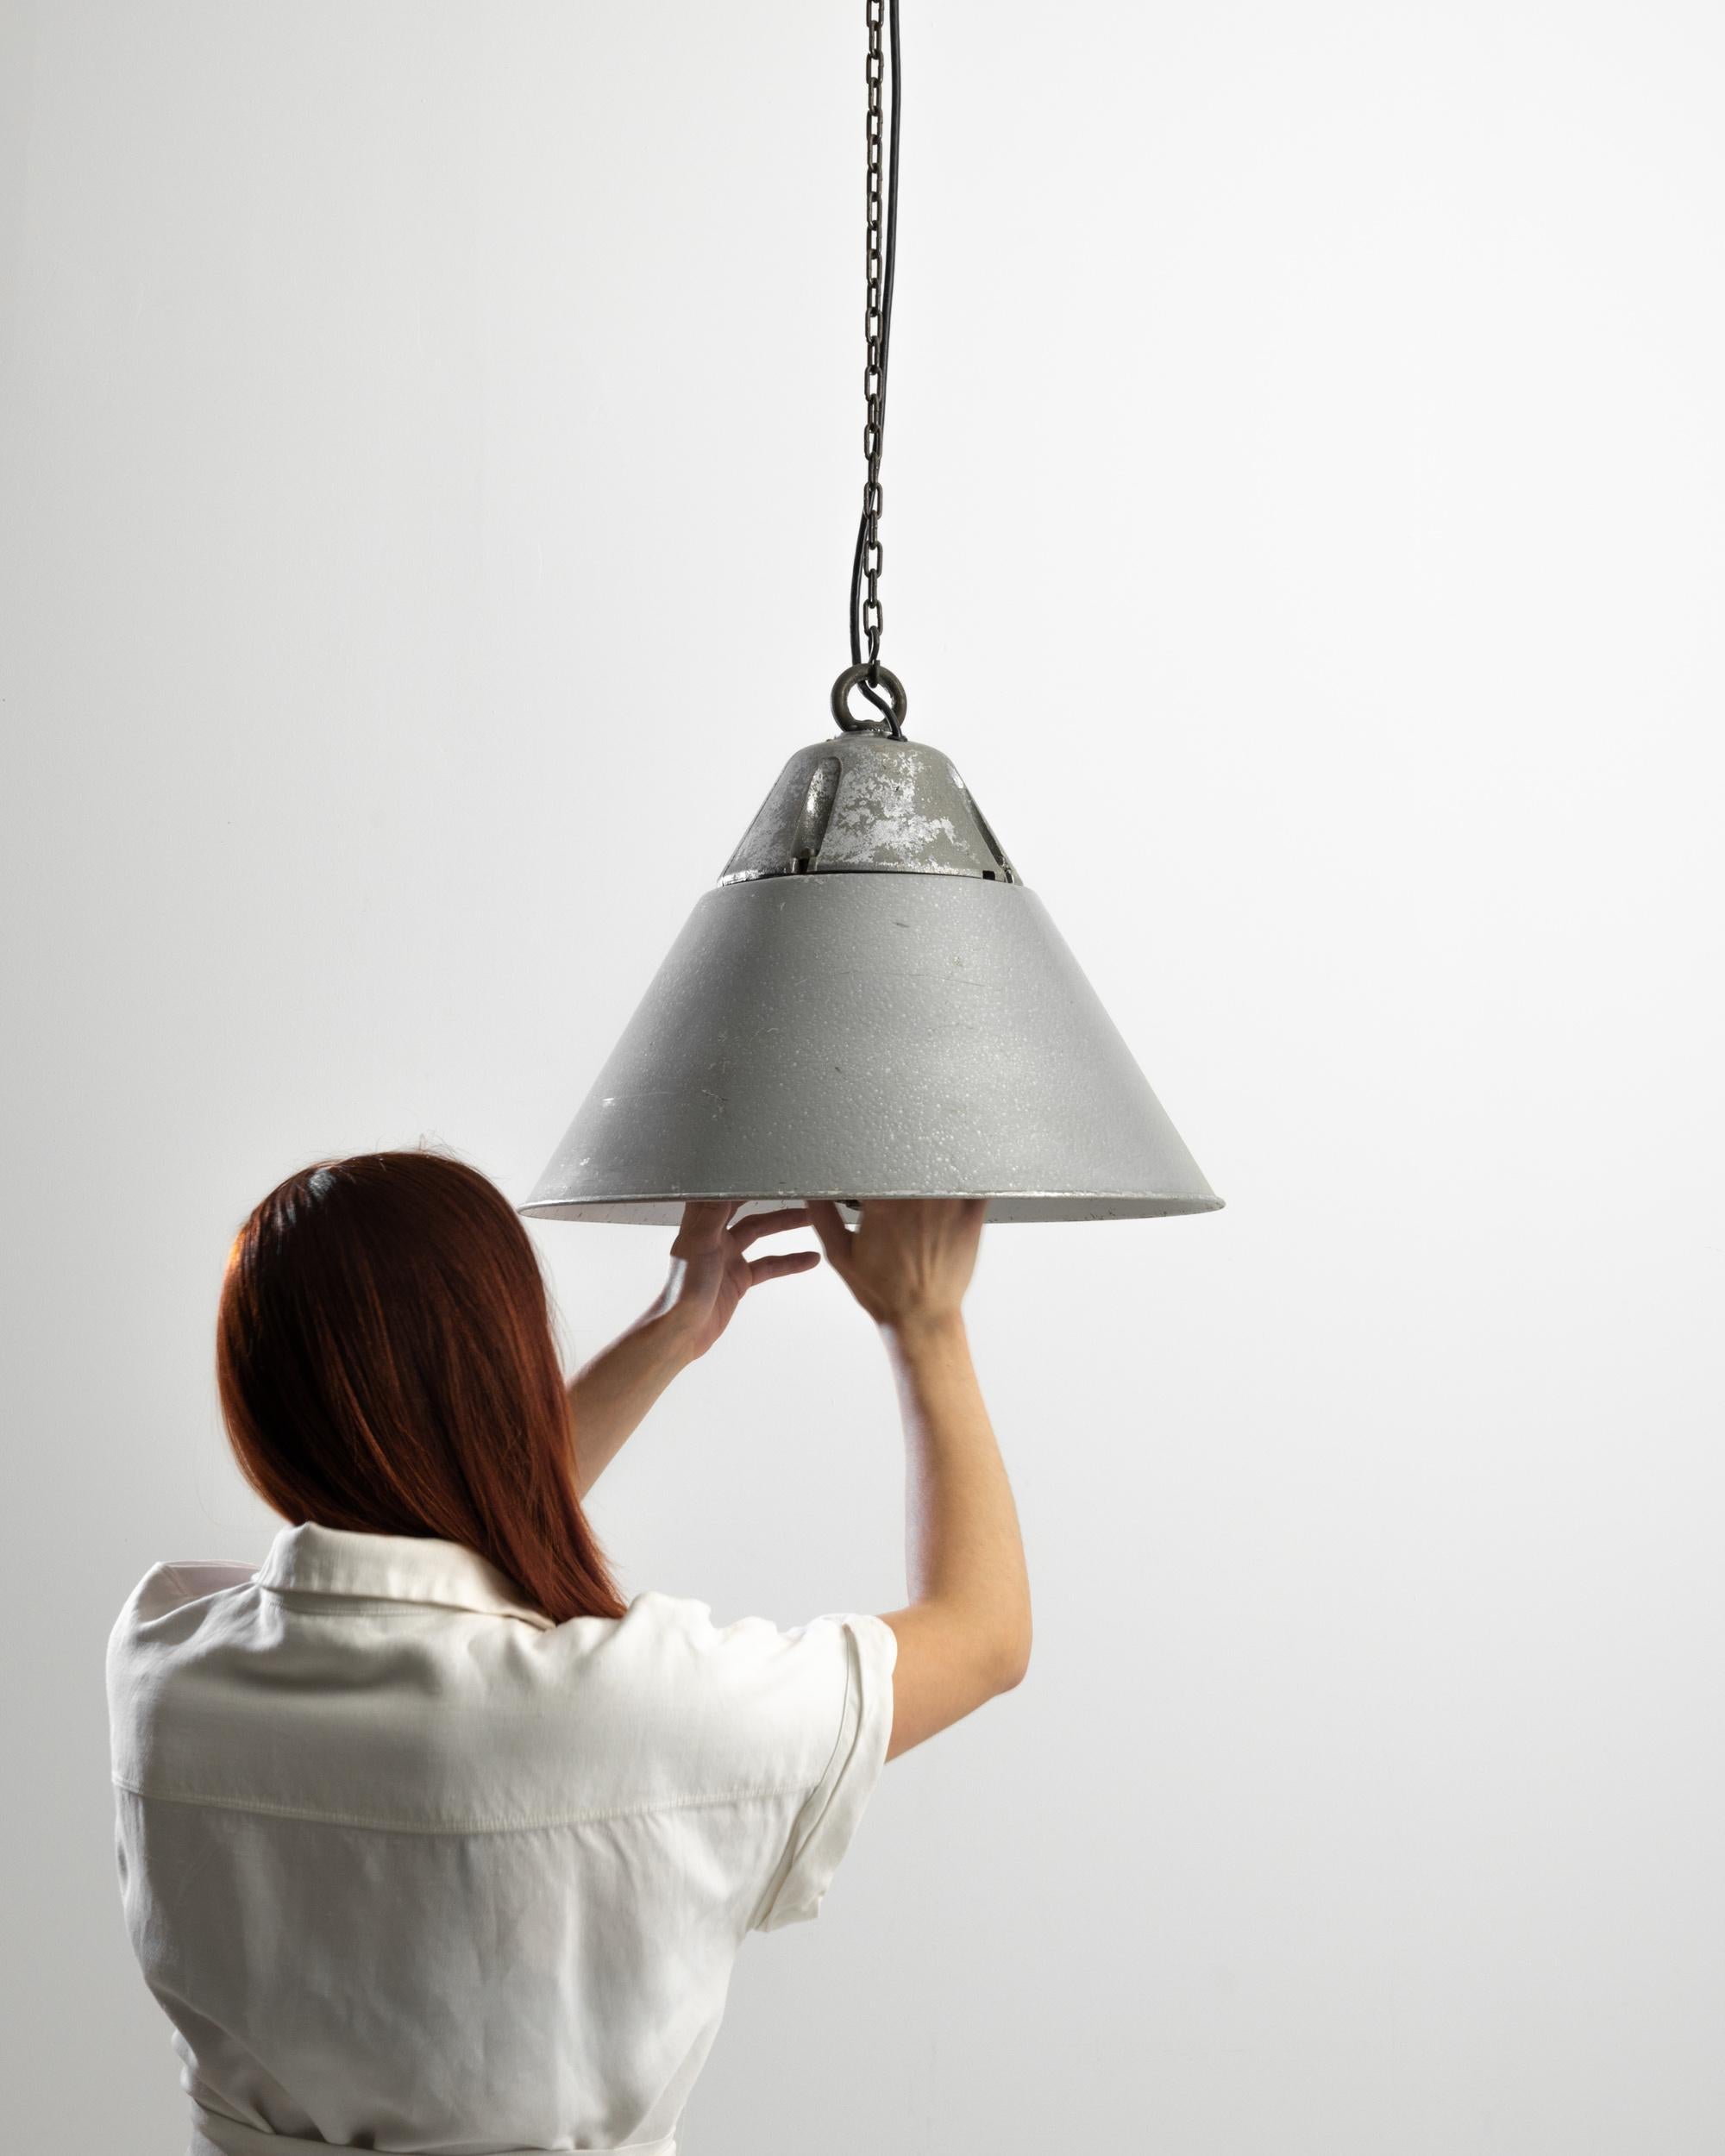 Sourced in Central Europe, this 20th Century piece instills a distressed industrial elegance. Suspended on a chain and arrow, the stripped down metal shade exhibits a white interior and a flared profile, creating a diffuse light for an intimate